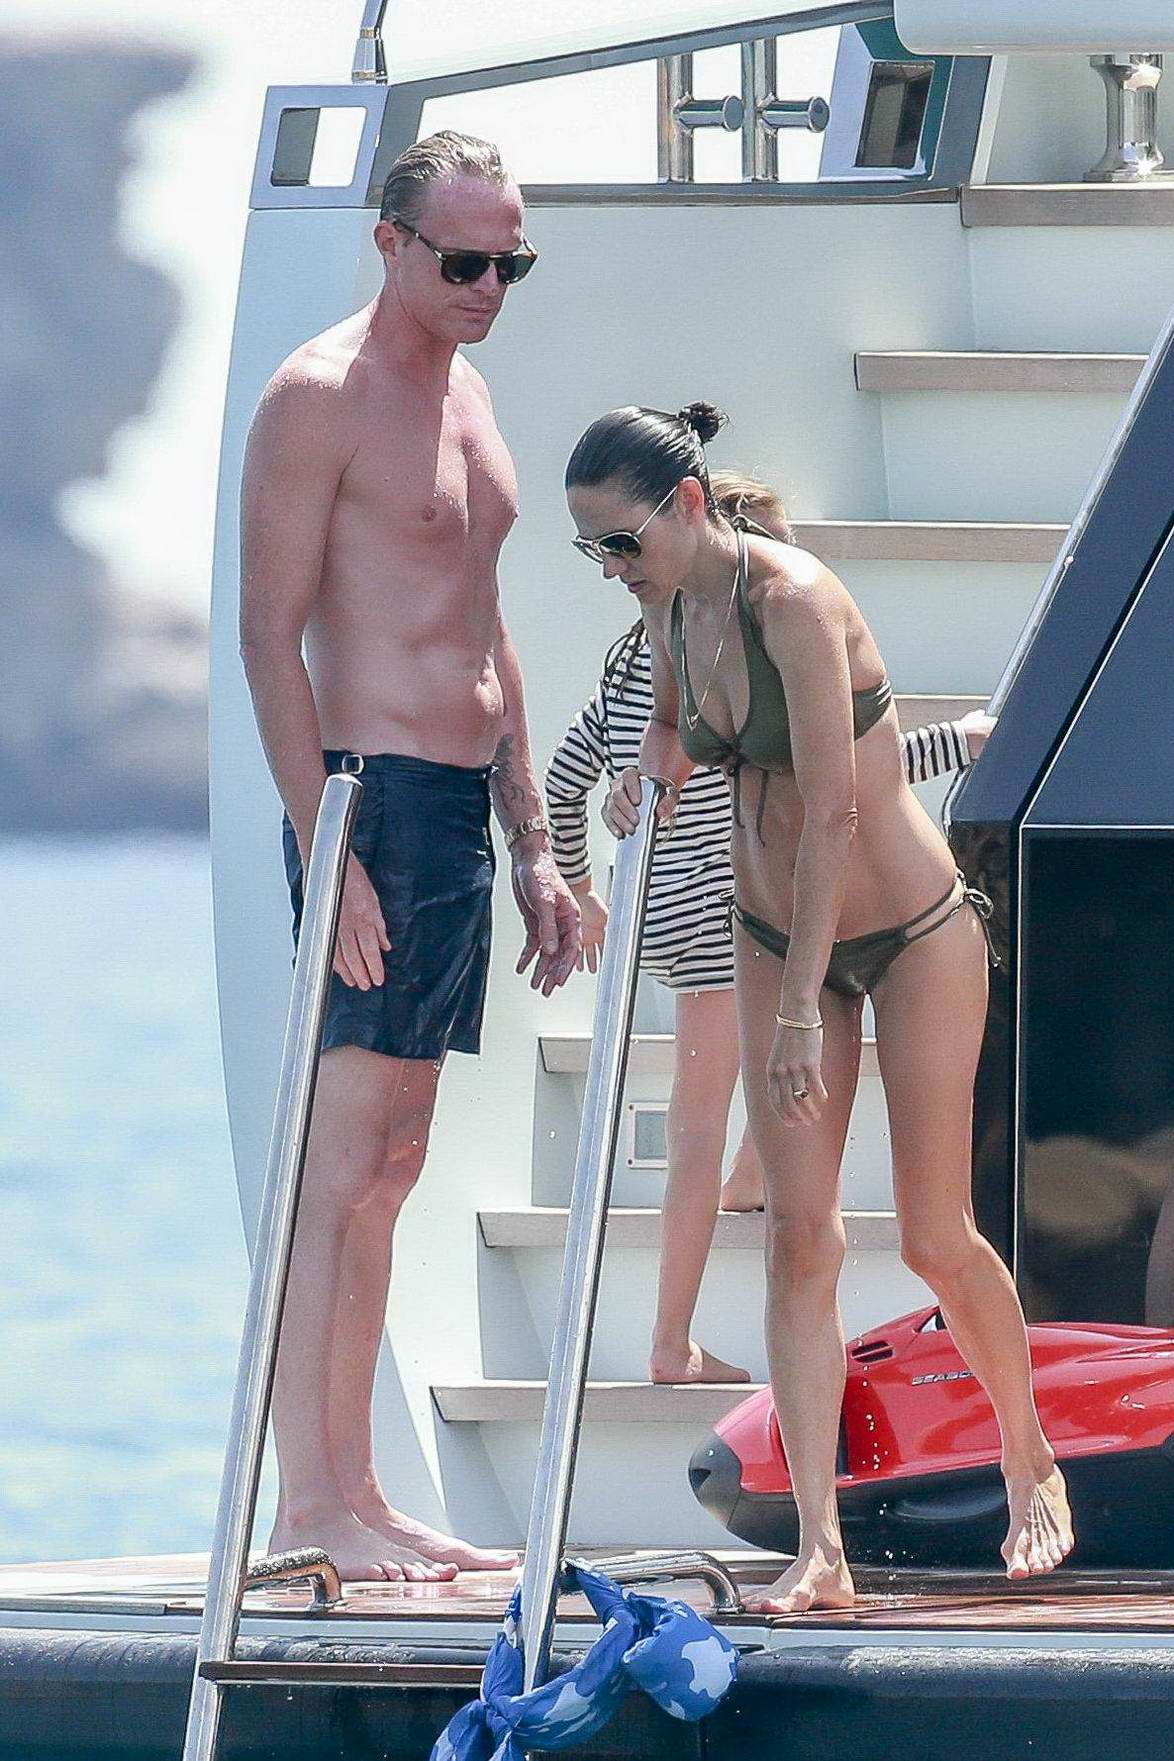 Jennifer Connelly stuns in a black bikini while relaxing on a